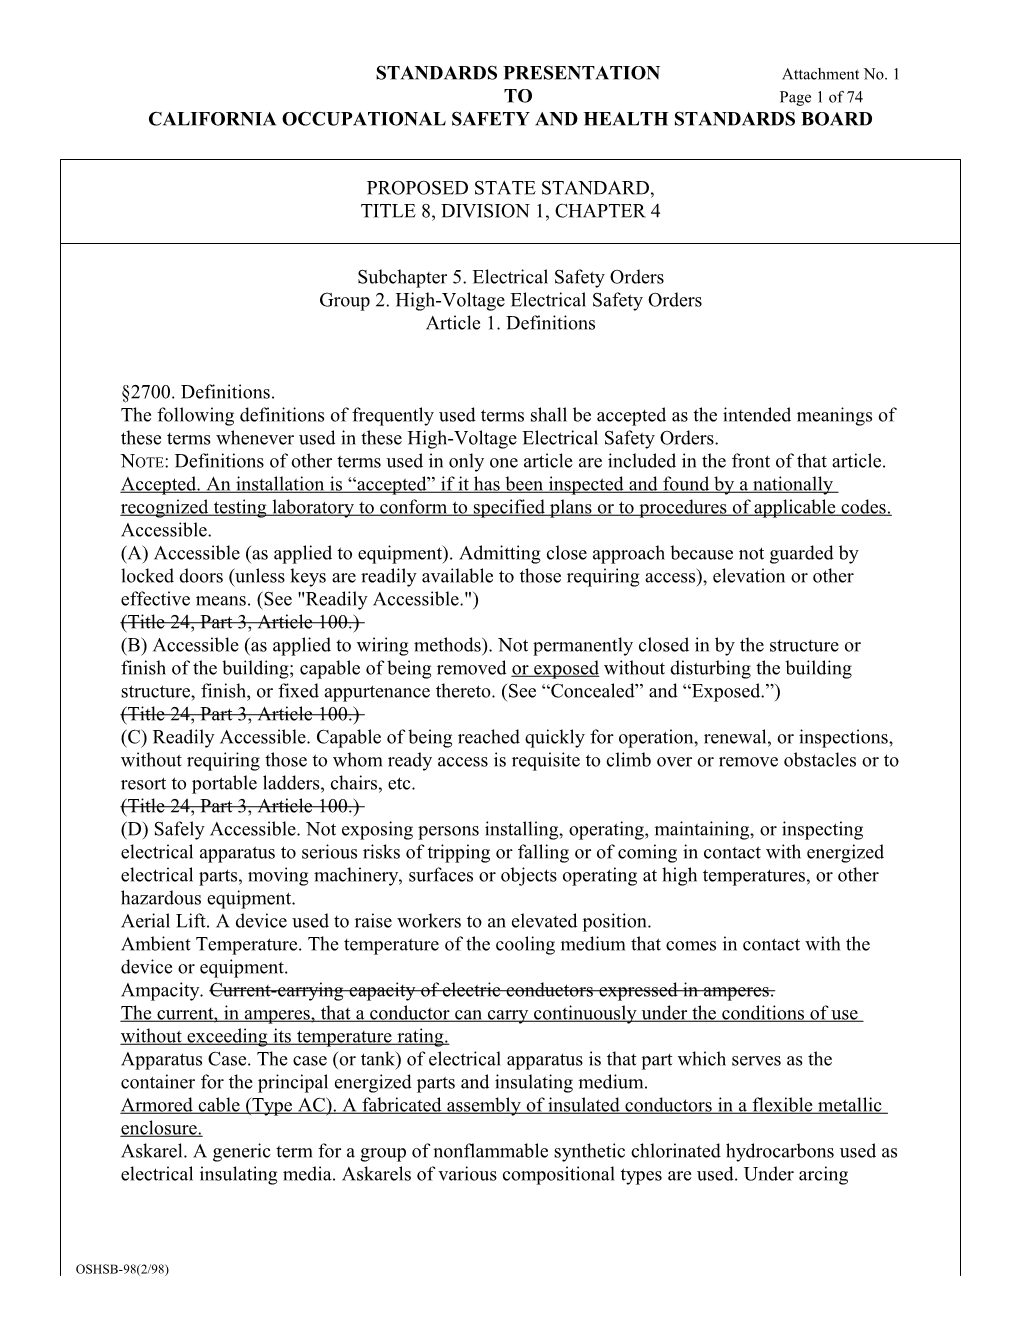 California Occupational Safety and Health Standards Board s1